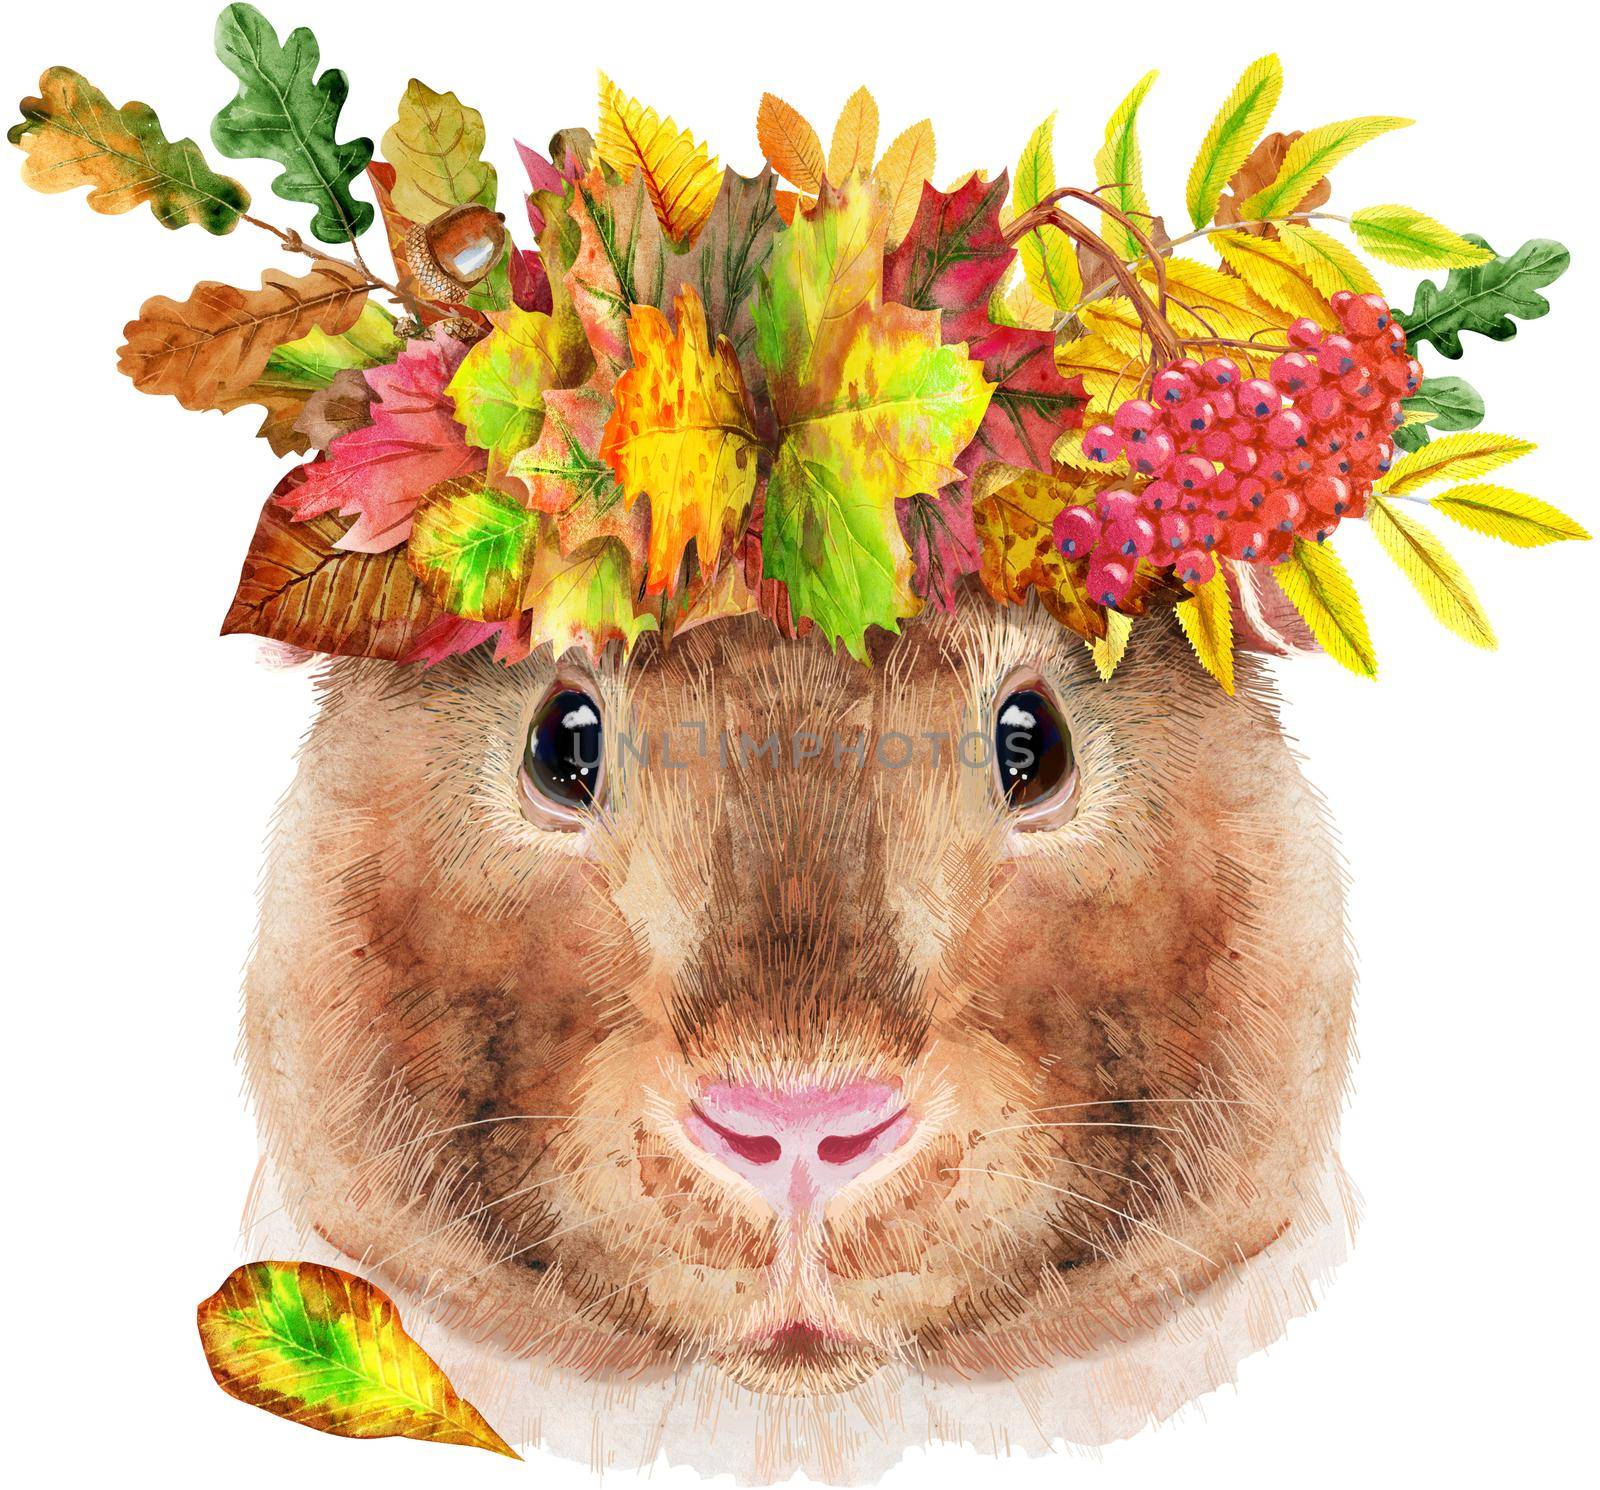 Watercolor portrait of Teddy guinea pig with wreath of leaves on white background by NataOmsk